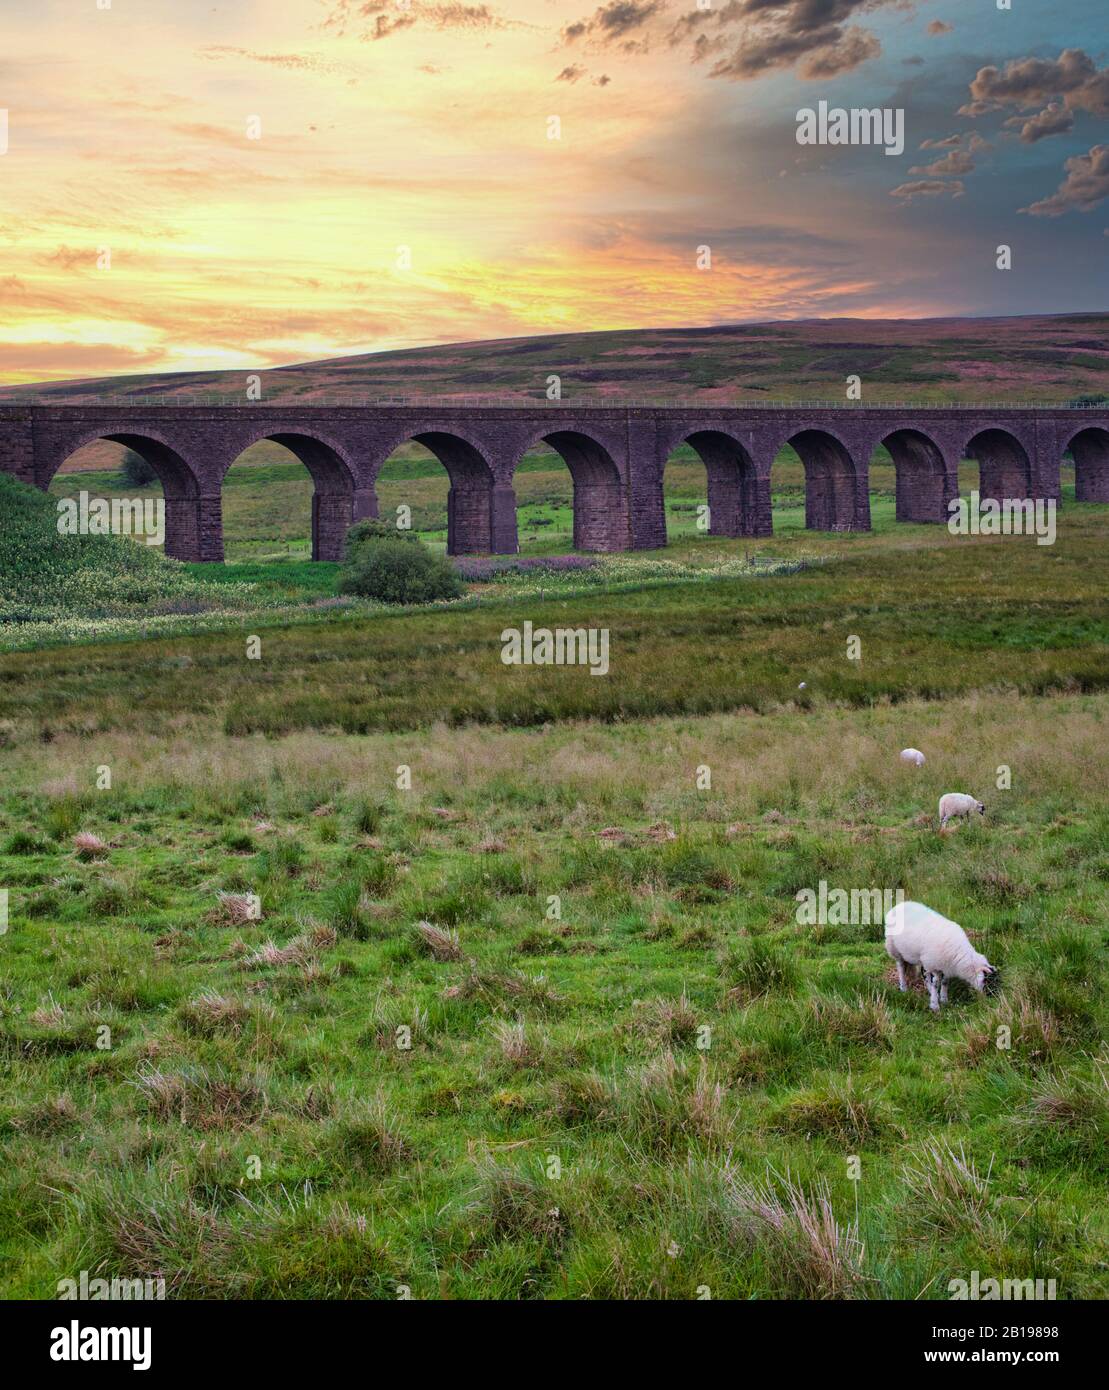 Sunset over the Ribblehead Viaduct which carries the Settle-Carlisle railway line across the Ribble Valley at Ribblehead, North Yorkshire, England Stock Photo